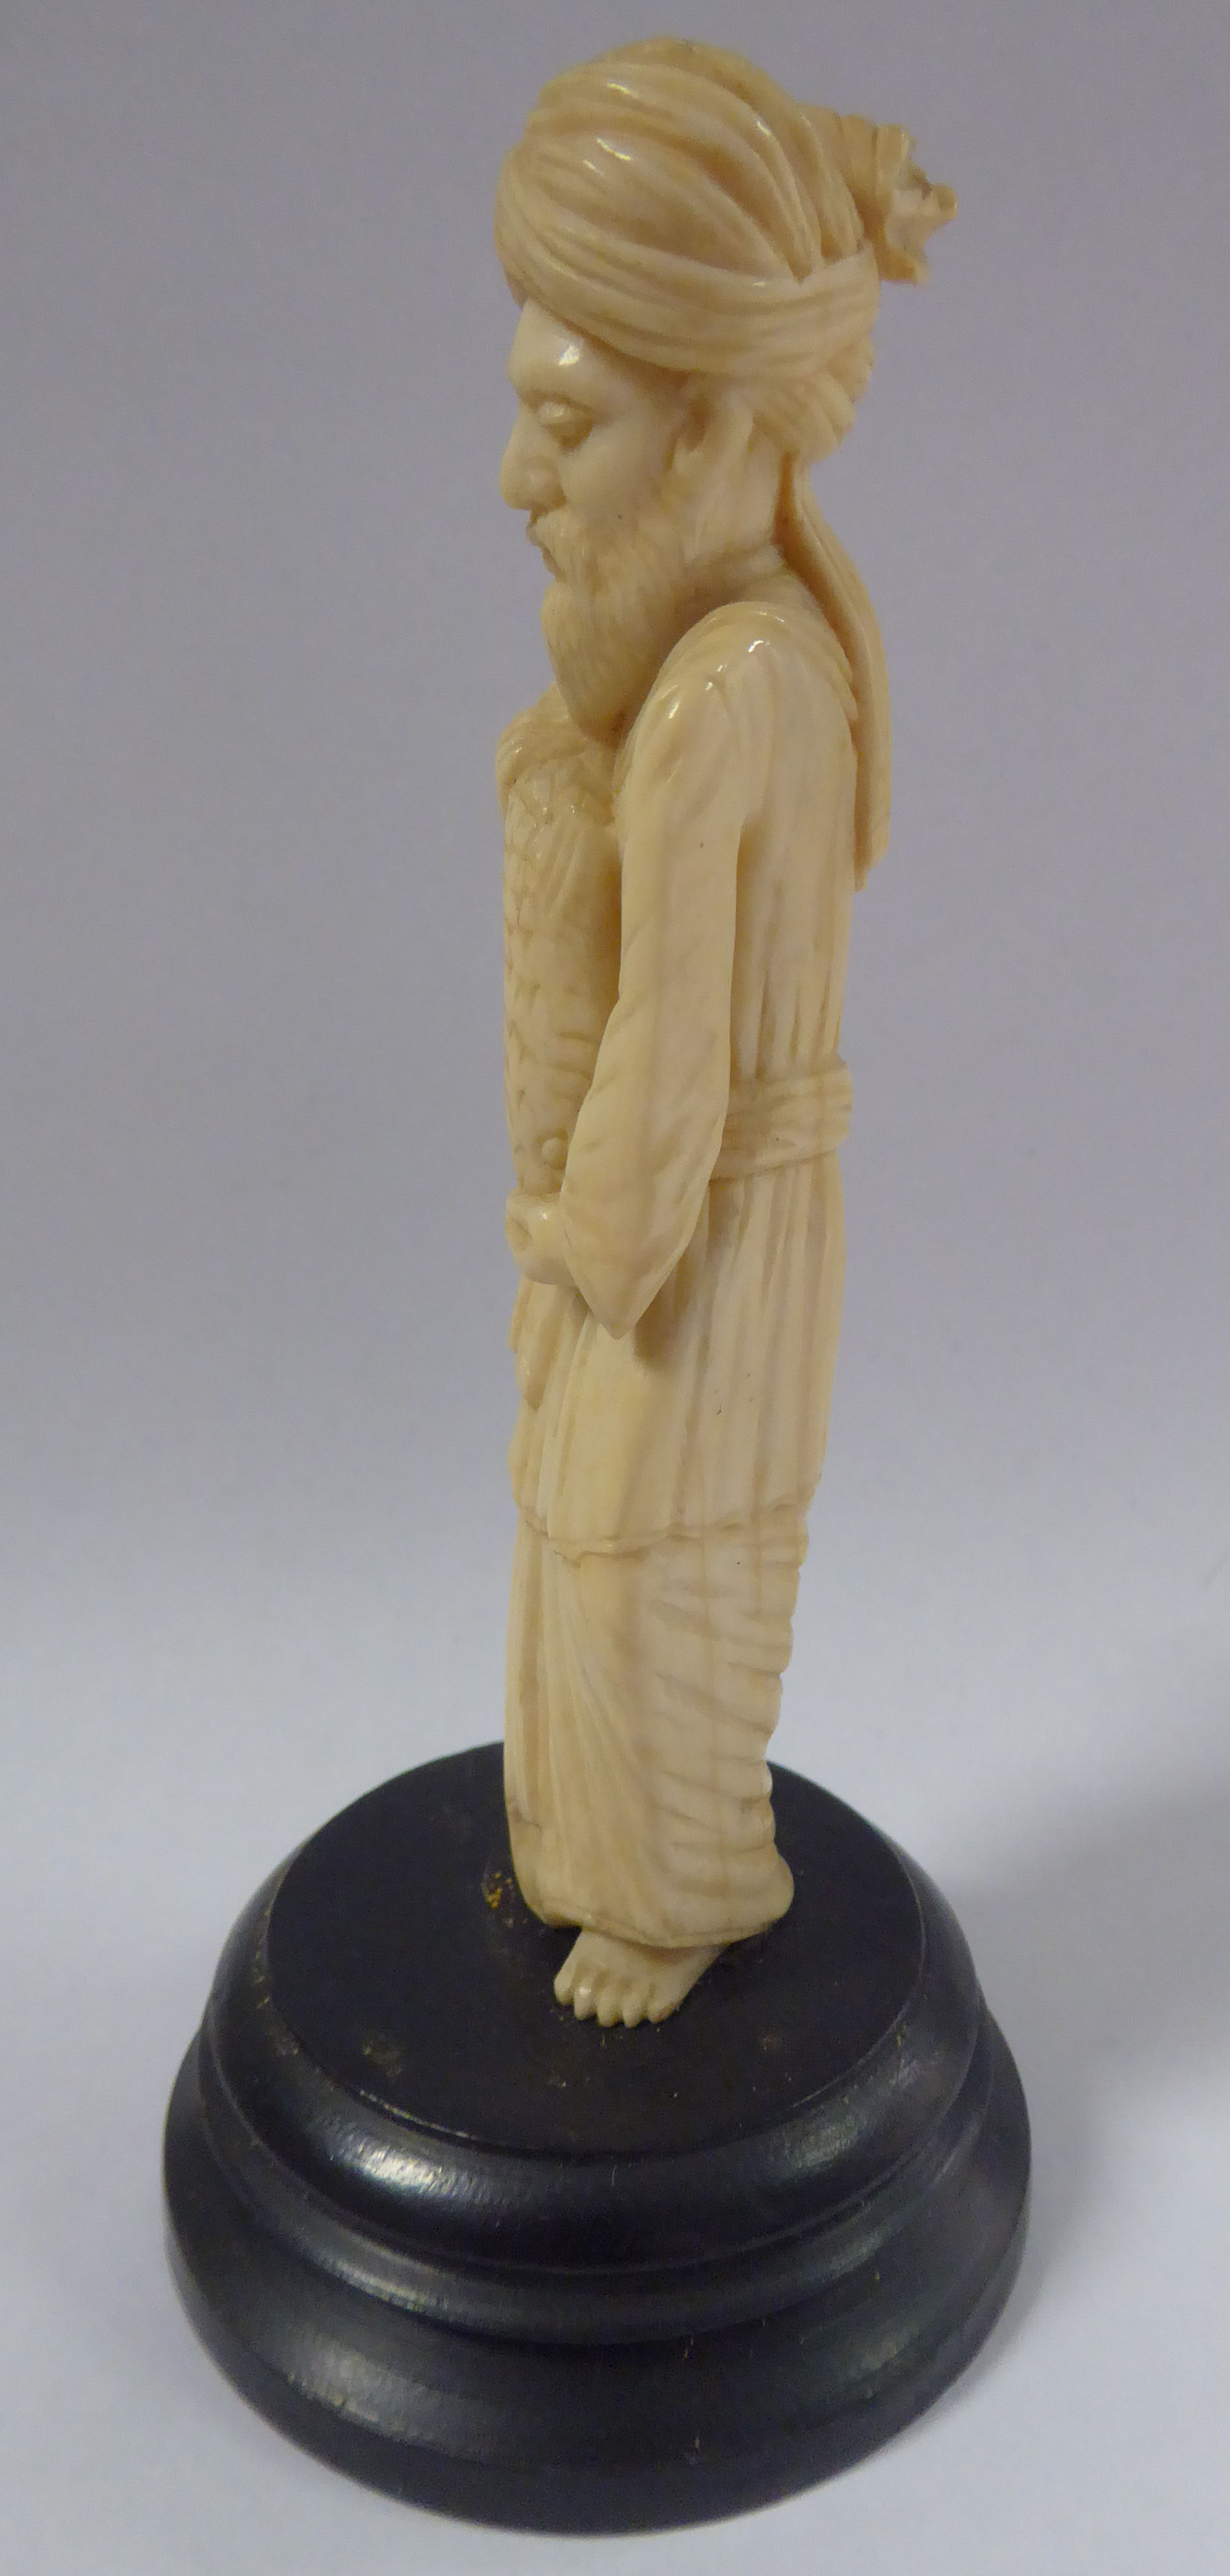 An early 20thC Asian carved ivory standing figure, a bearded man, wearing a turban and robes, - Image 2 of 6